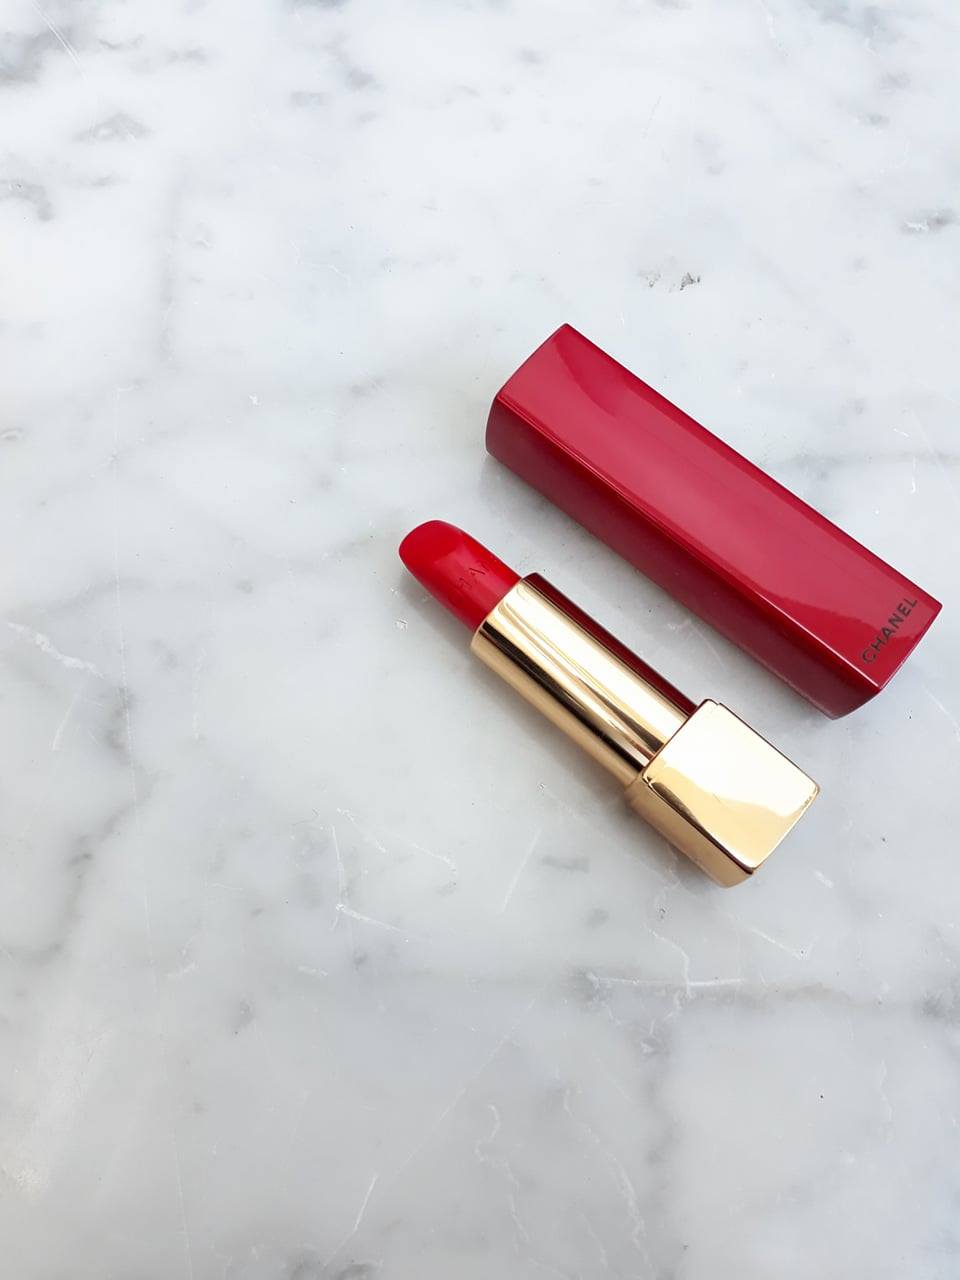 Review & Swatches: Chanel Collection Libre Numeros Rouges Lipstick